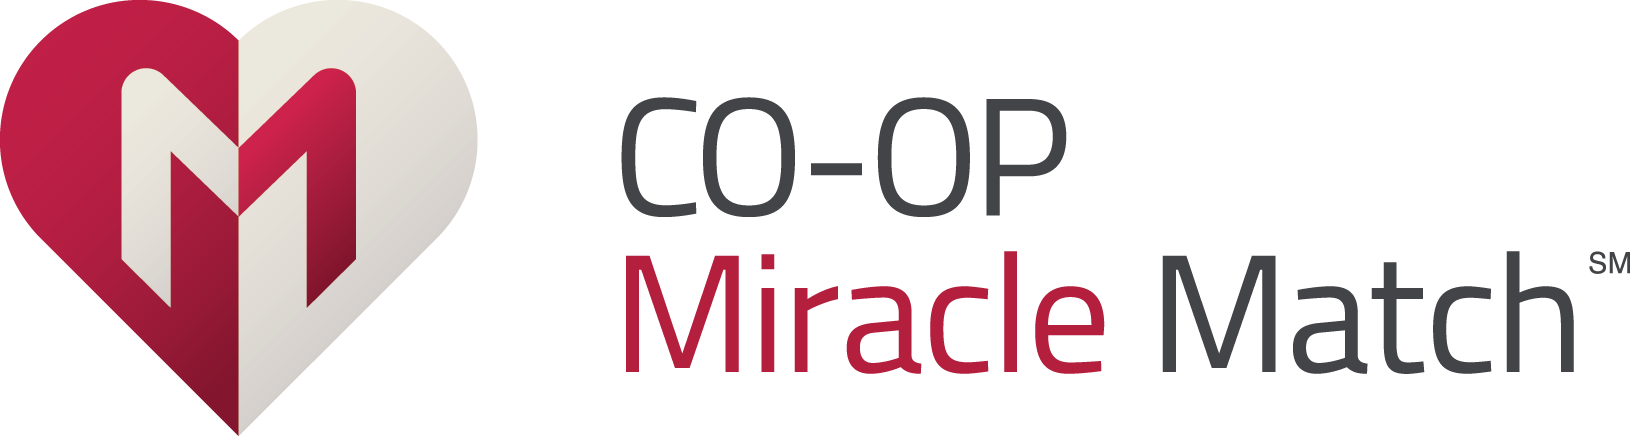 Co-Op Miracle Match logo